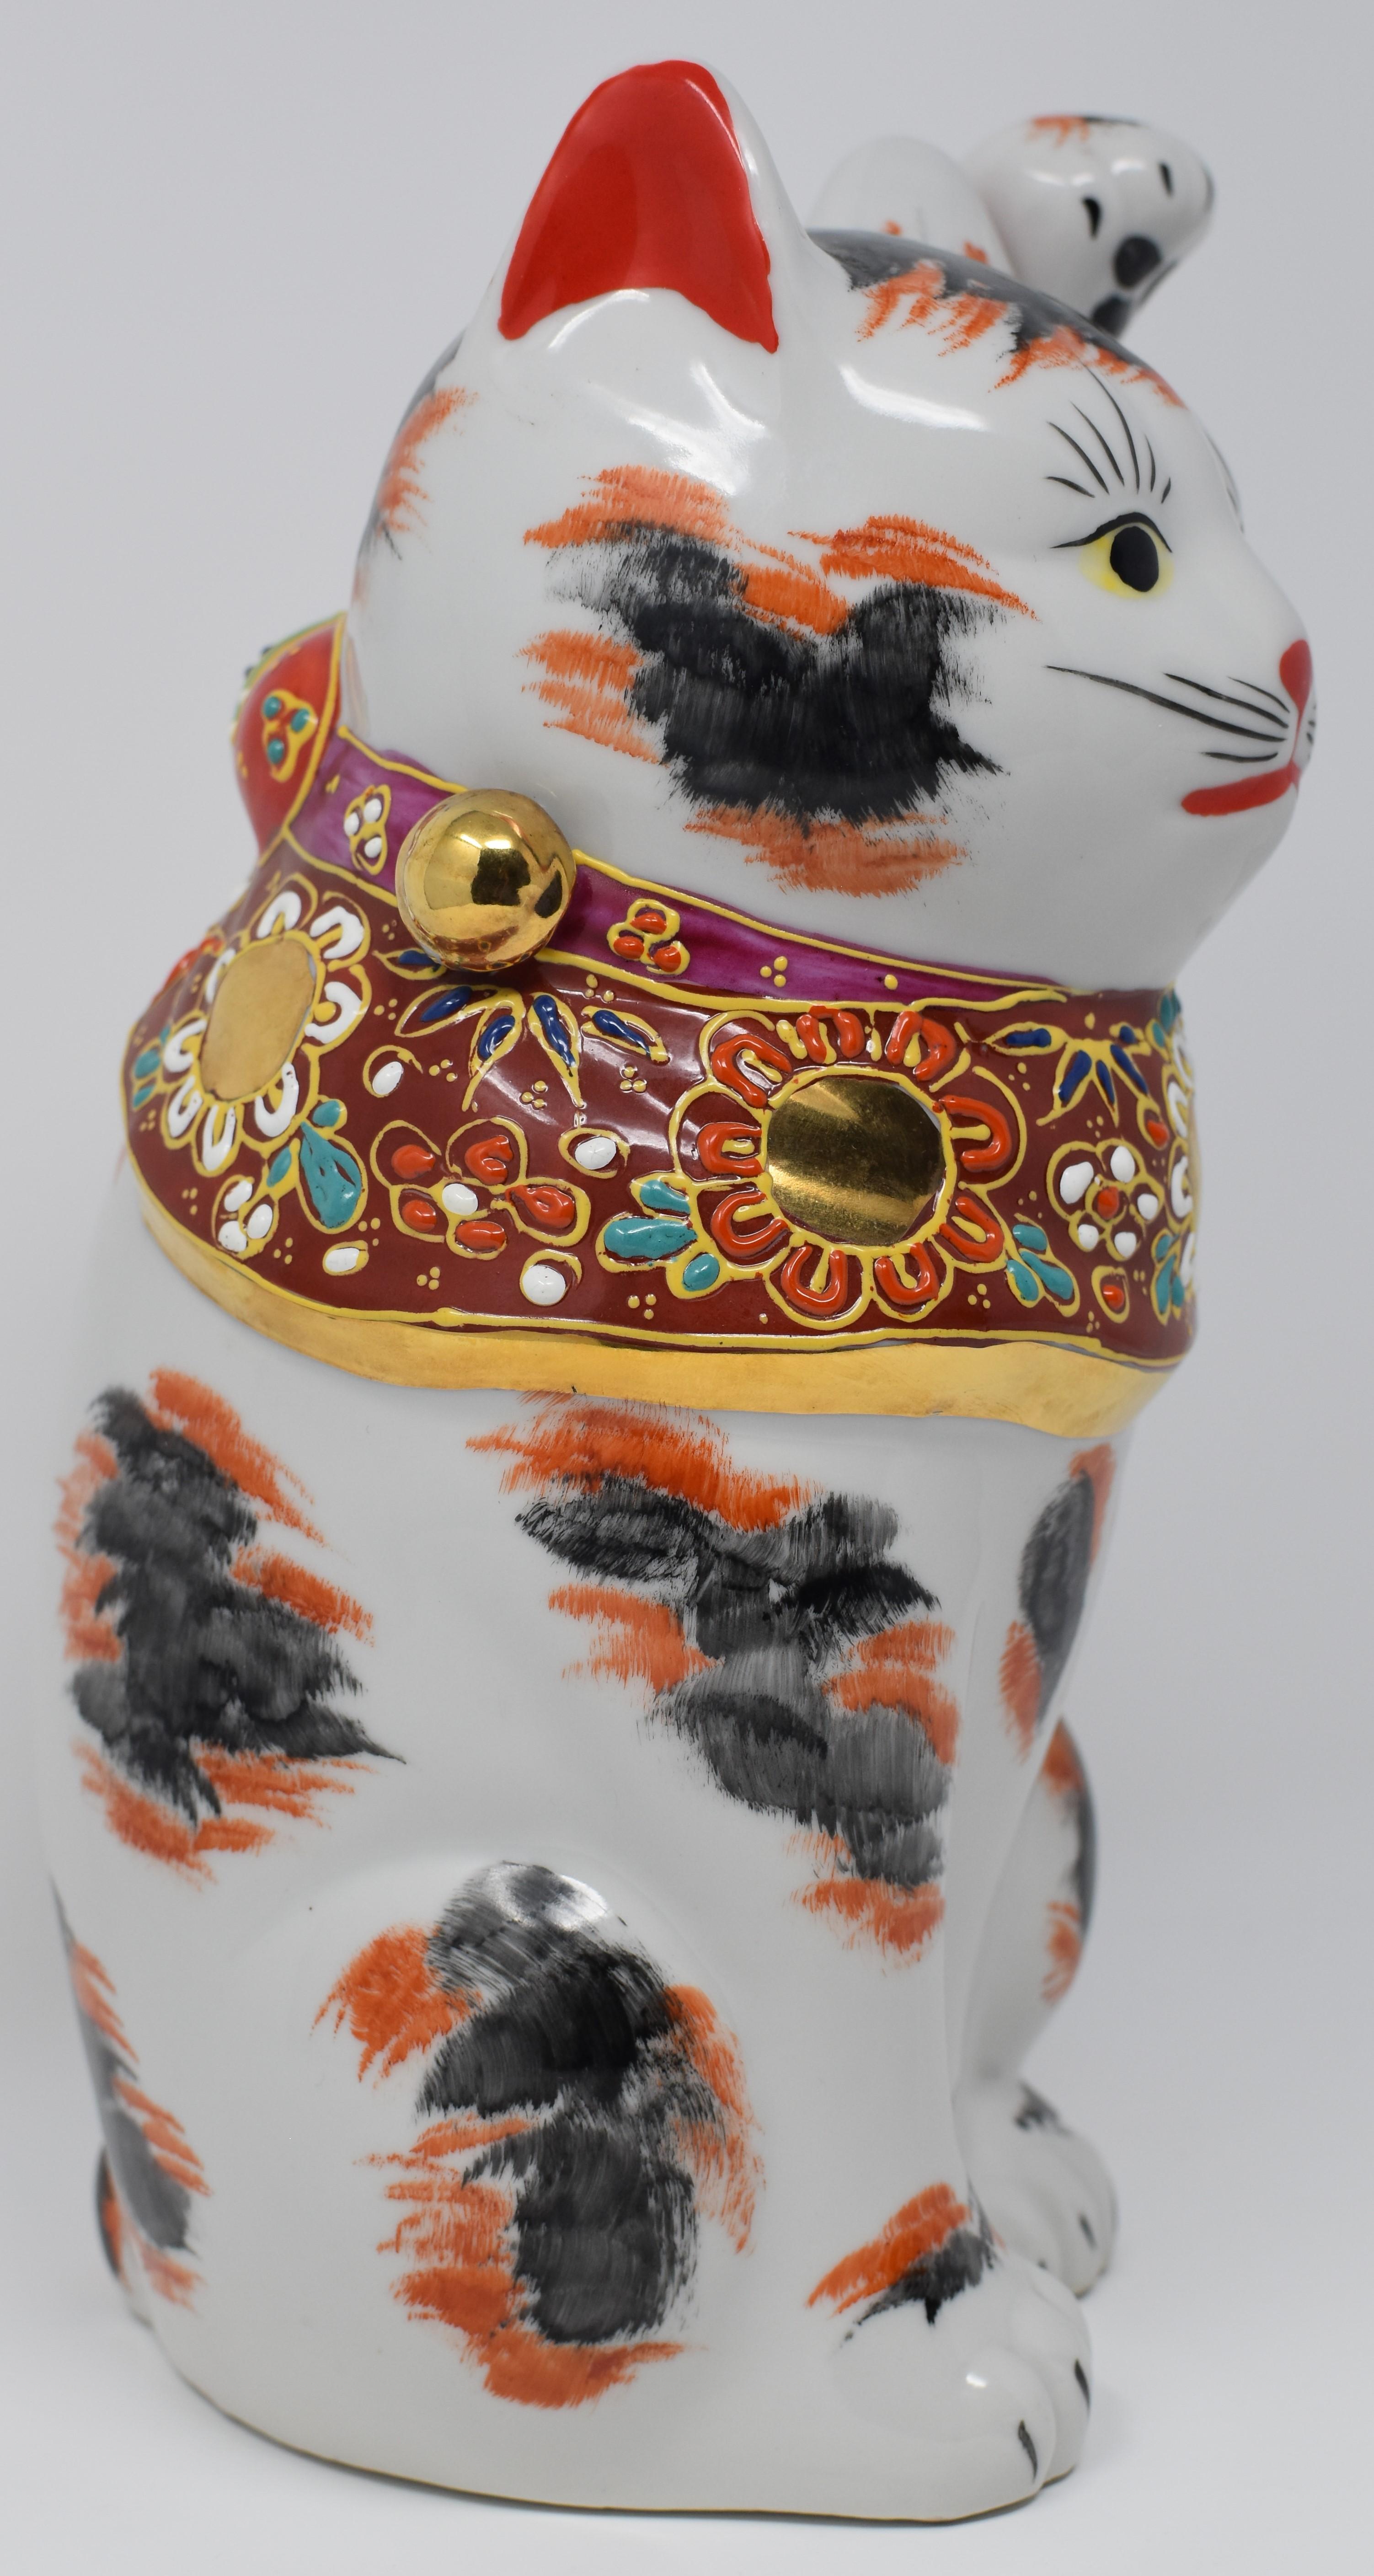 This charming left-handed beckoning cat is a gilded and hand-painted porcelain piece from the Kutani region of Japan.
The beckoning cat comes in two varieties. The more common right-handed beckoning cat (with right paw raised) is said to bring money